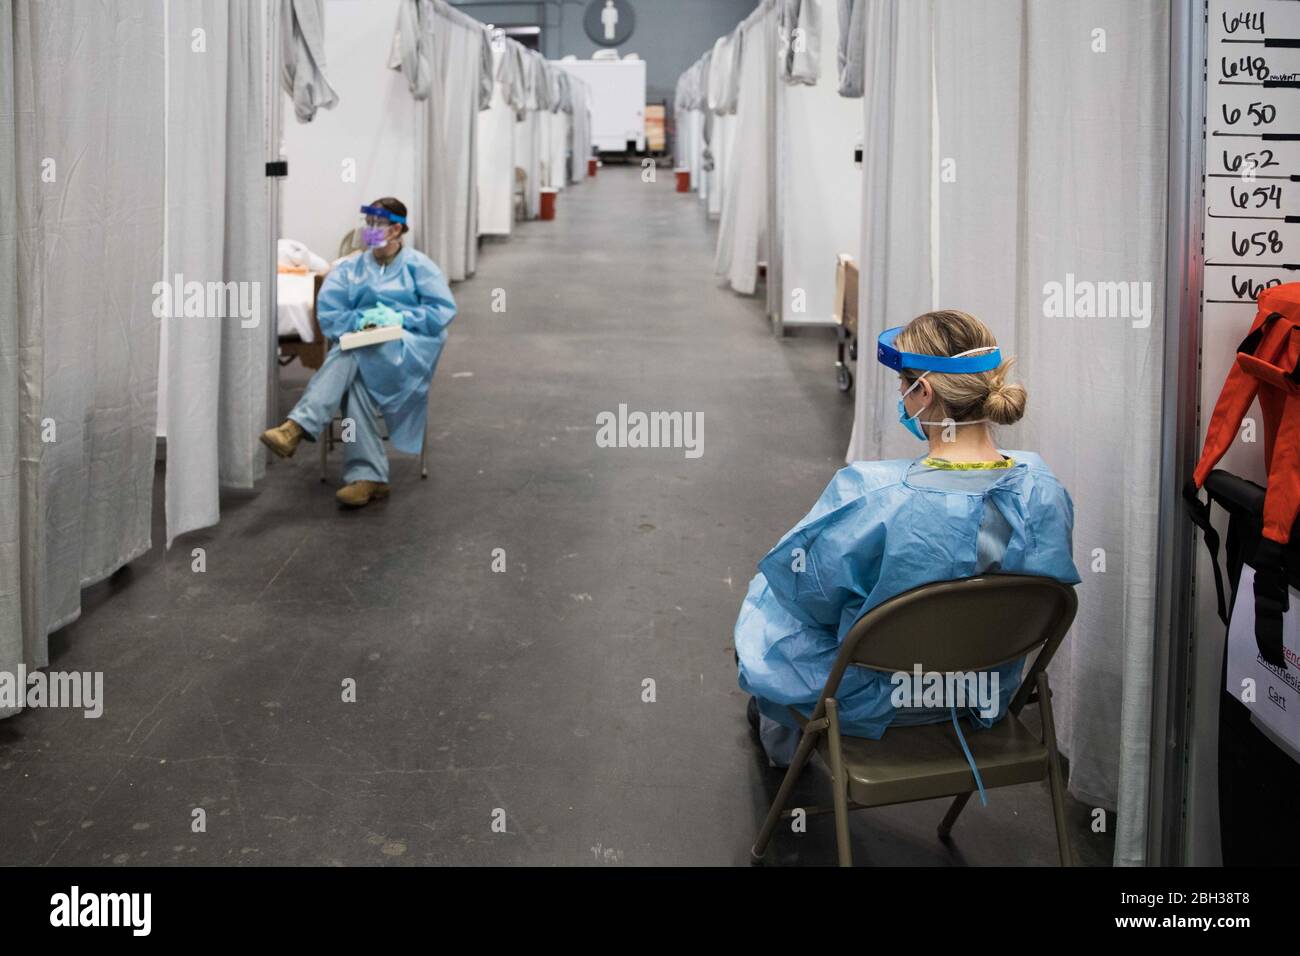 Soldiers assigned to the Javits New York Medical Station (JNYMS) at the Jacob K. Javits Convention Center in New York City monitor COVID-19 patients in the facility’s intensive care unit. Stock Photo